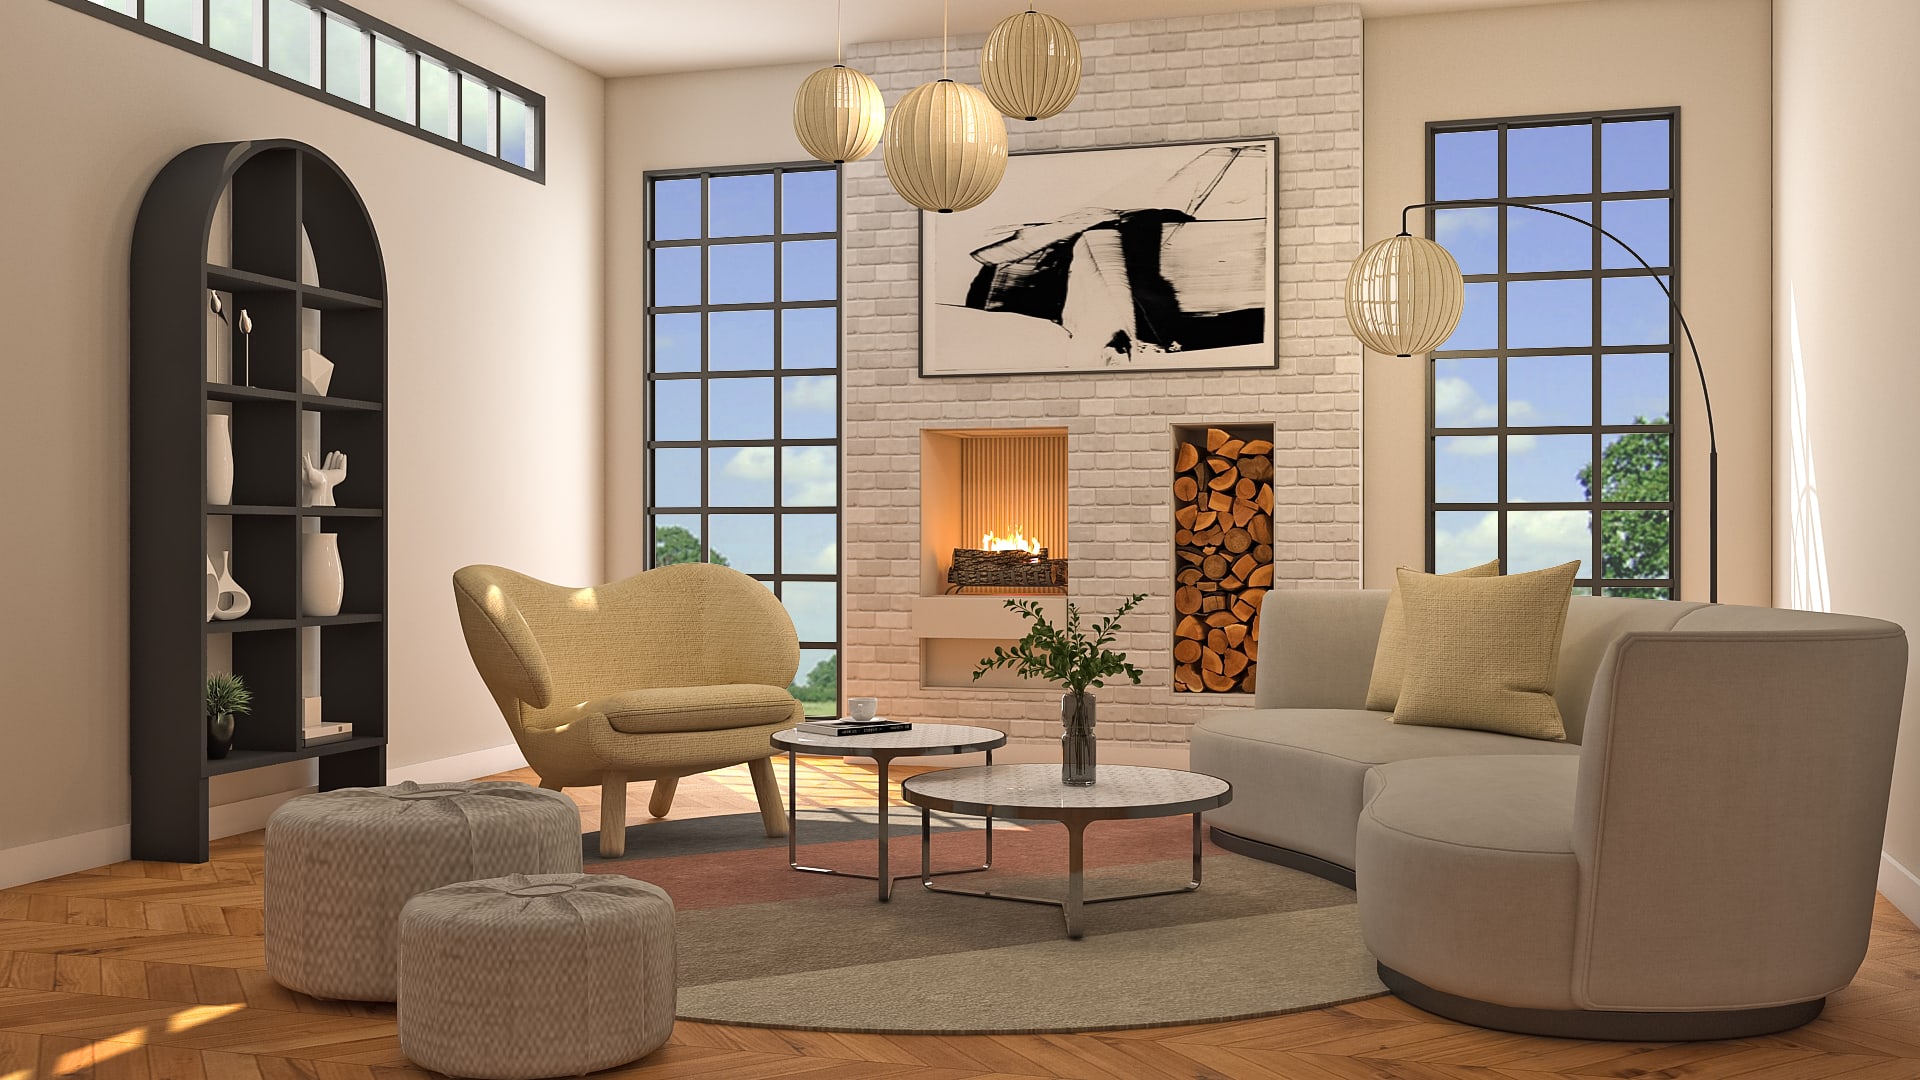 Mid-century modern decor, cocooning furniture, and organic shapes in a living room by Homilo